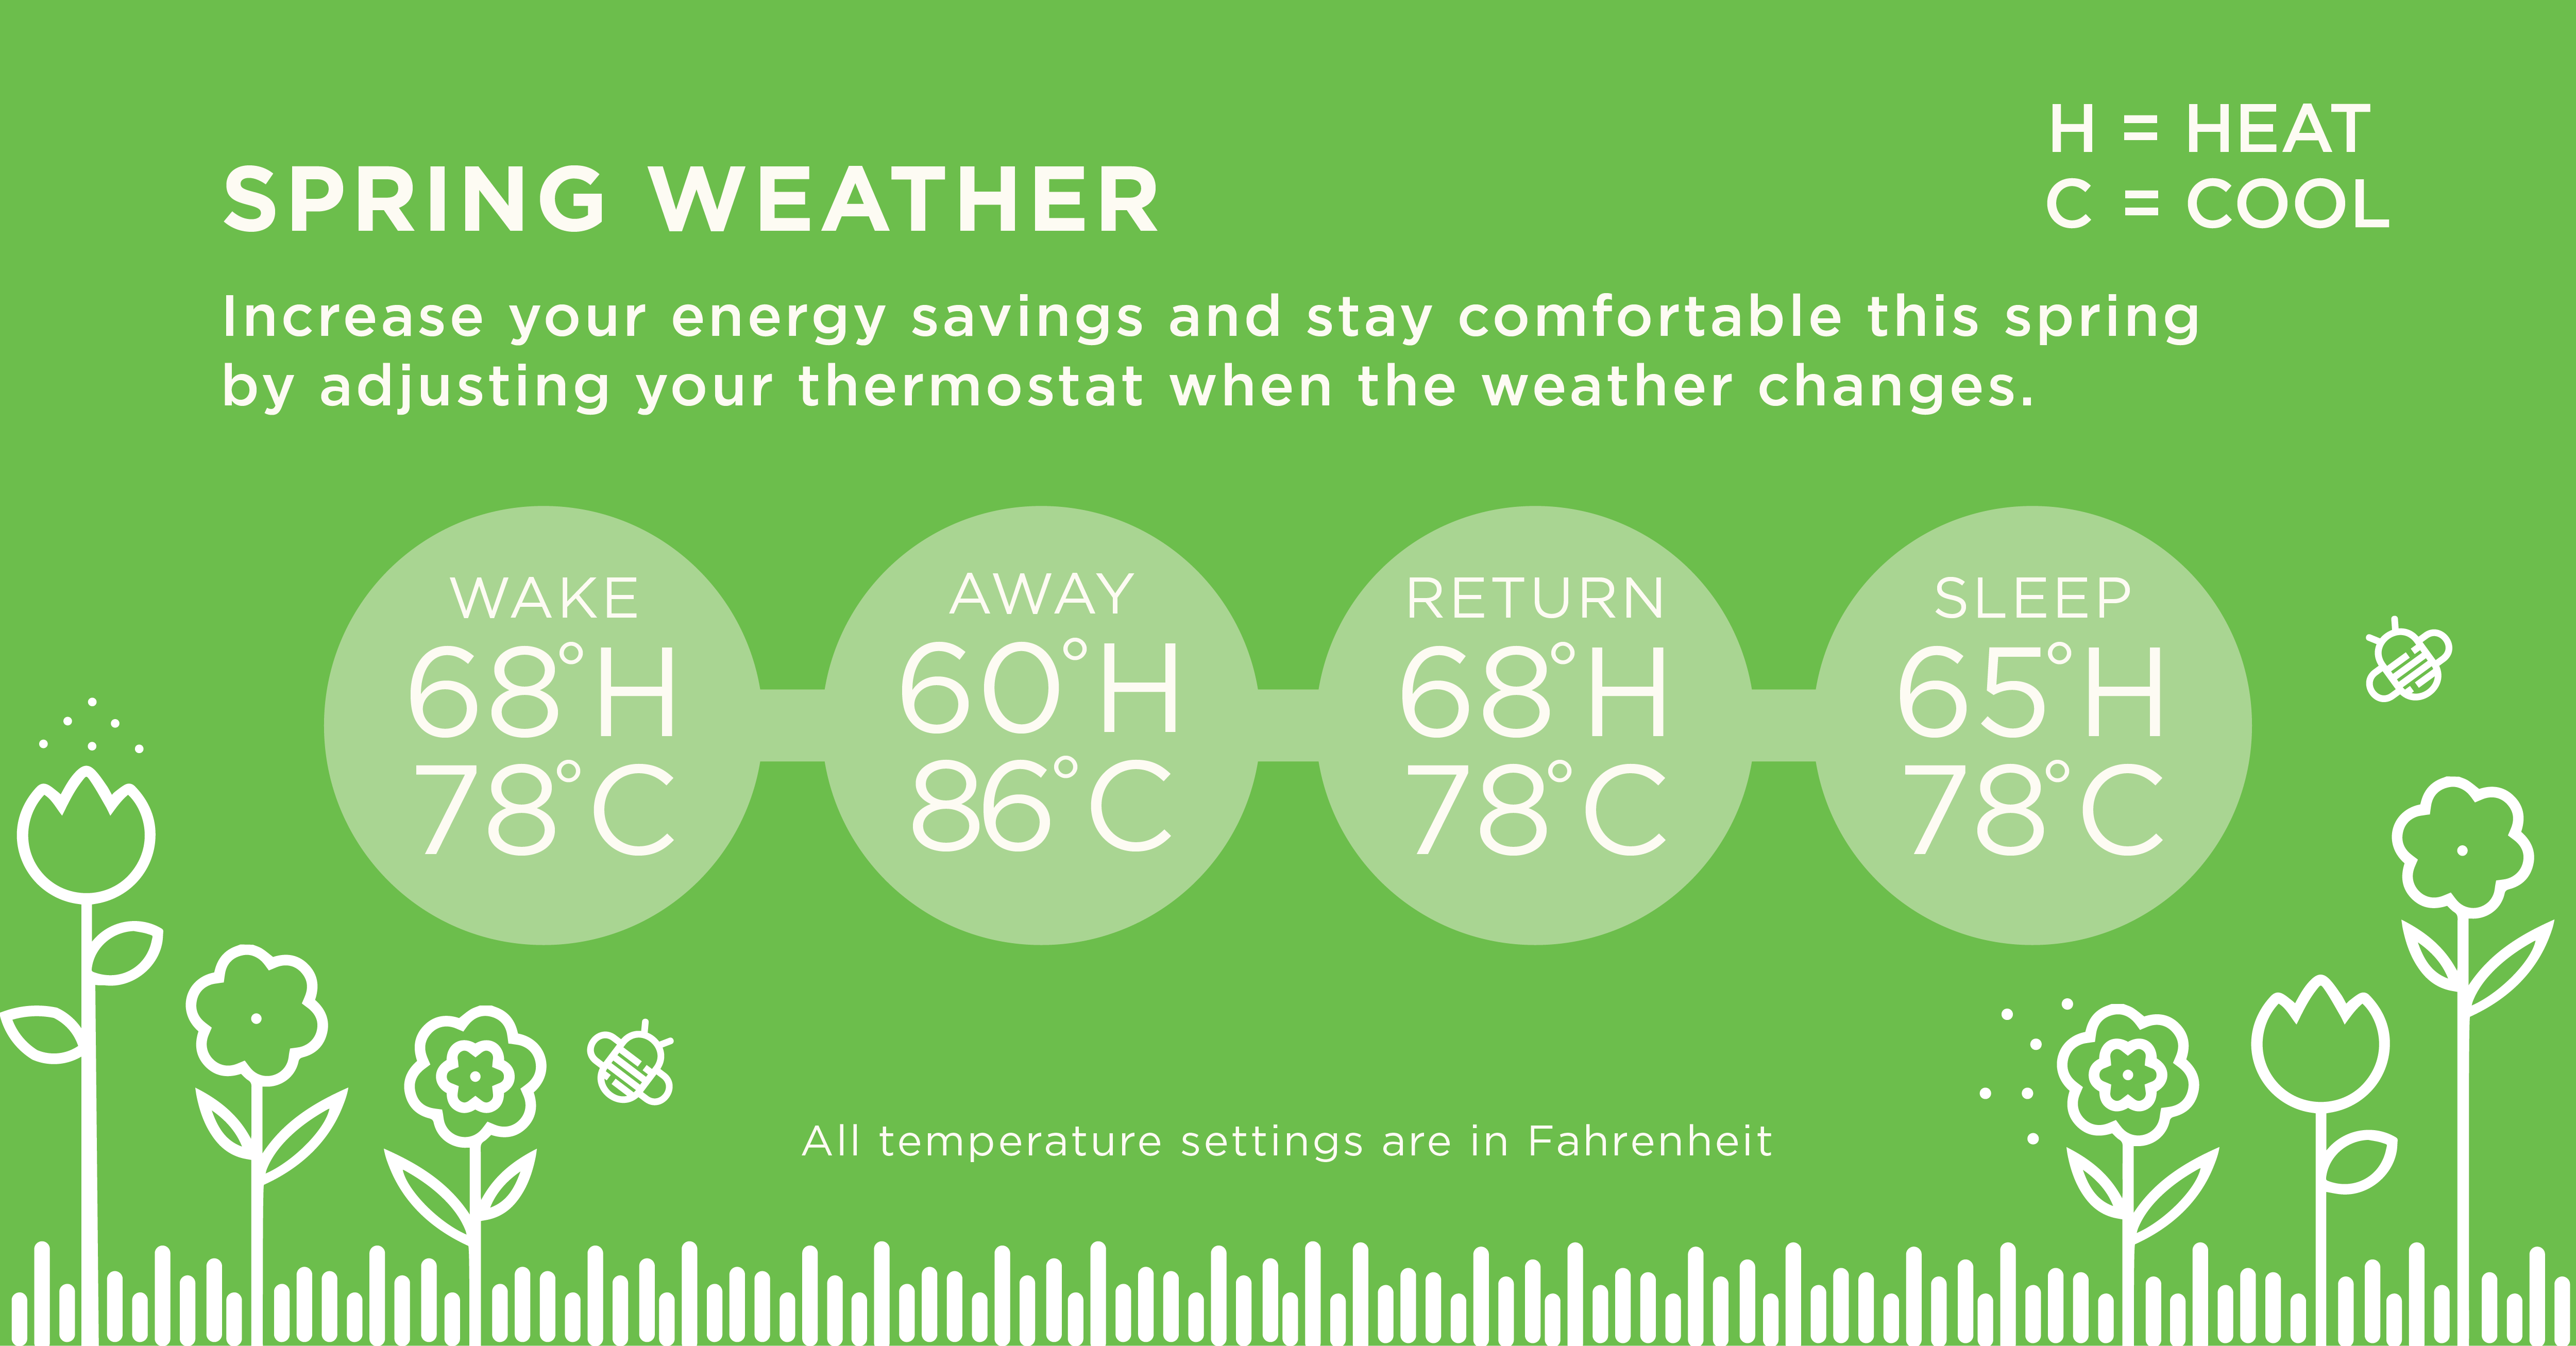 Spring Ideal Thermostat Settings image